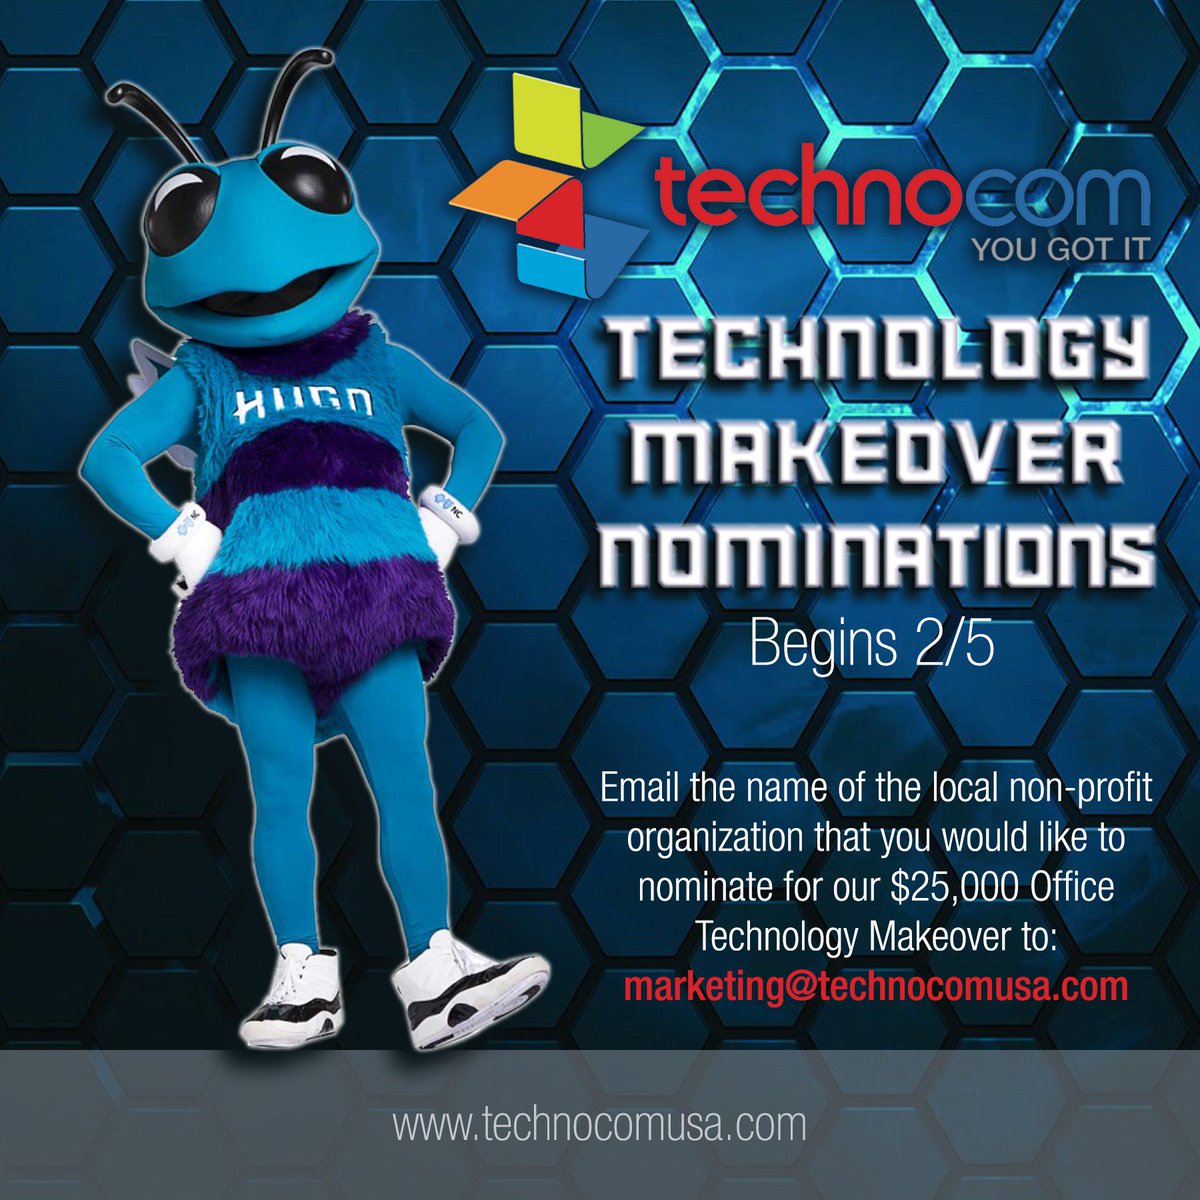 Nominations are open! Email the name of the local non-profit that you would like to nominate for this year’s $25,000 #TechnologyMakeover with the @hornets!
 
Nominations will be accepted from 2/5-2/28 The top 3 nominees will move on as finalists in March!

Good luck! #YouGotIt